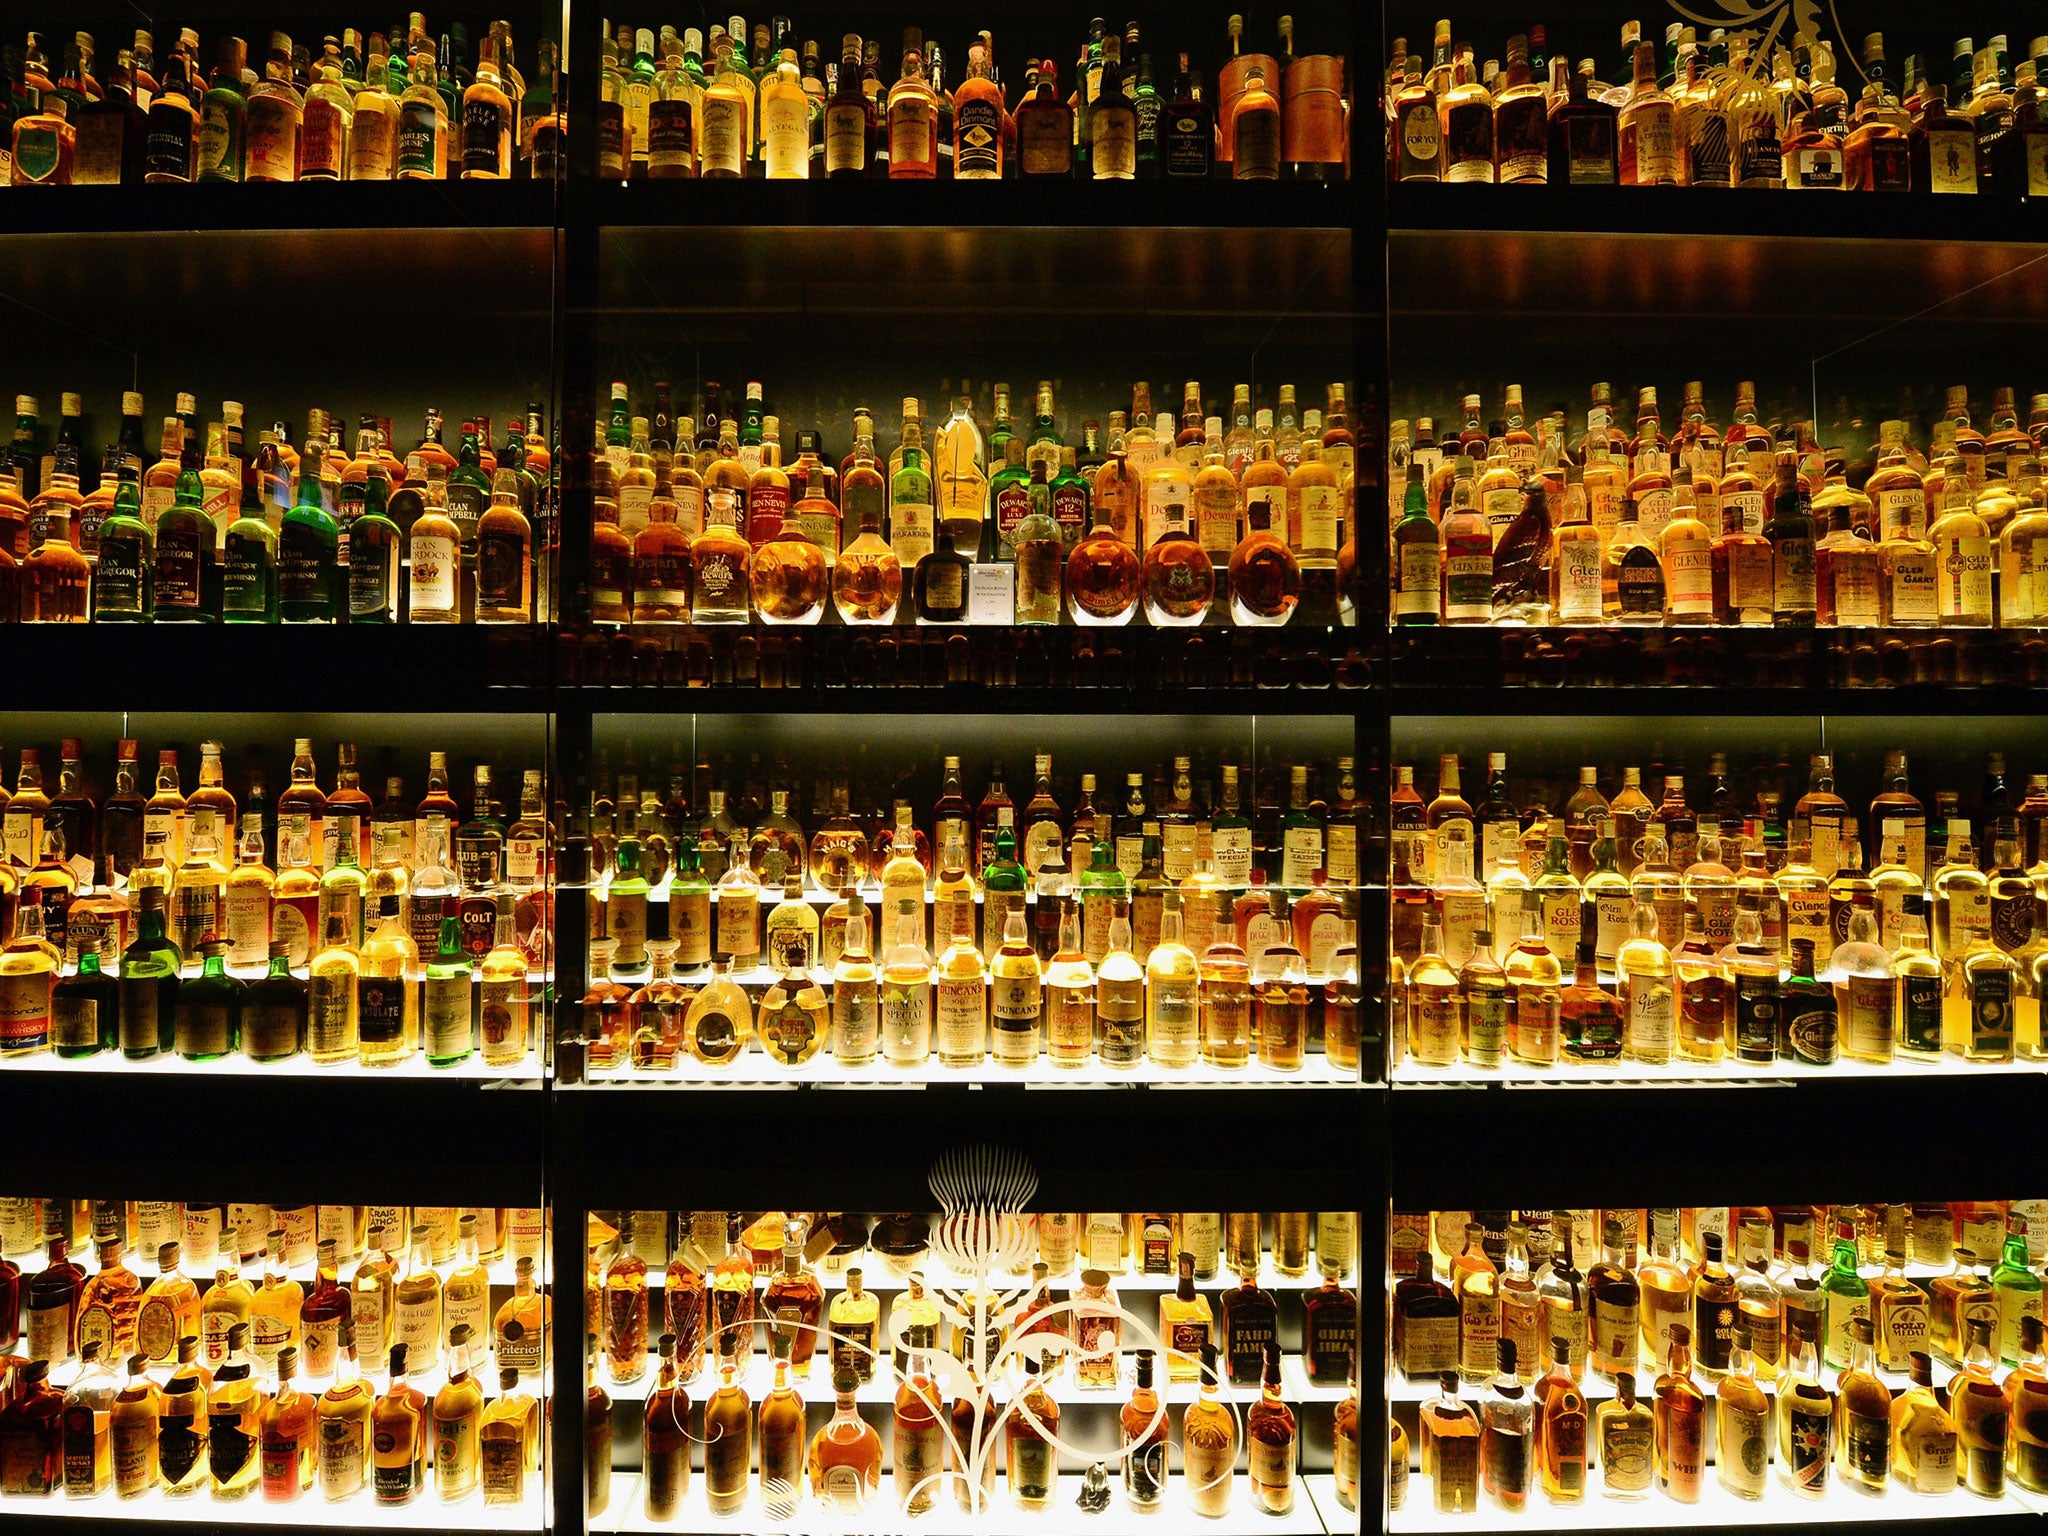 Bottles of whisky on display in the Diageo Claive Vidiz Collection